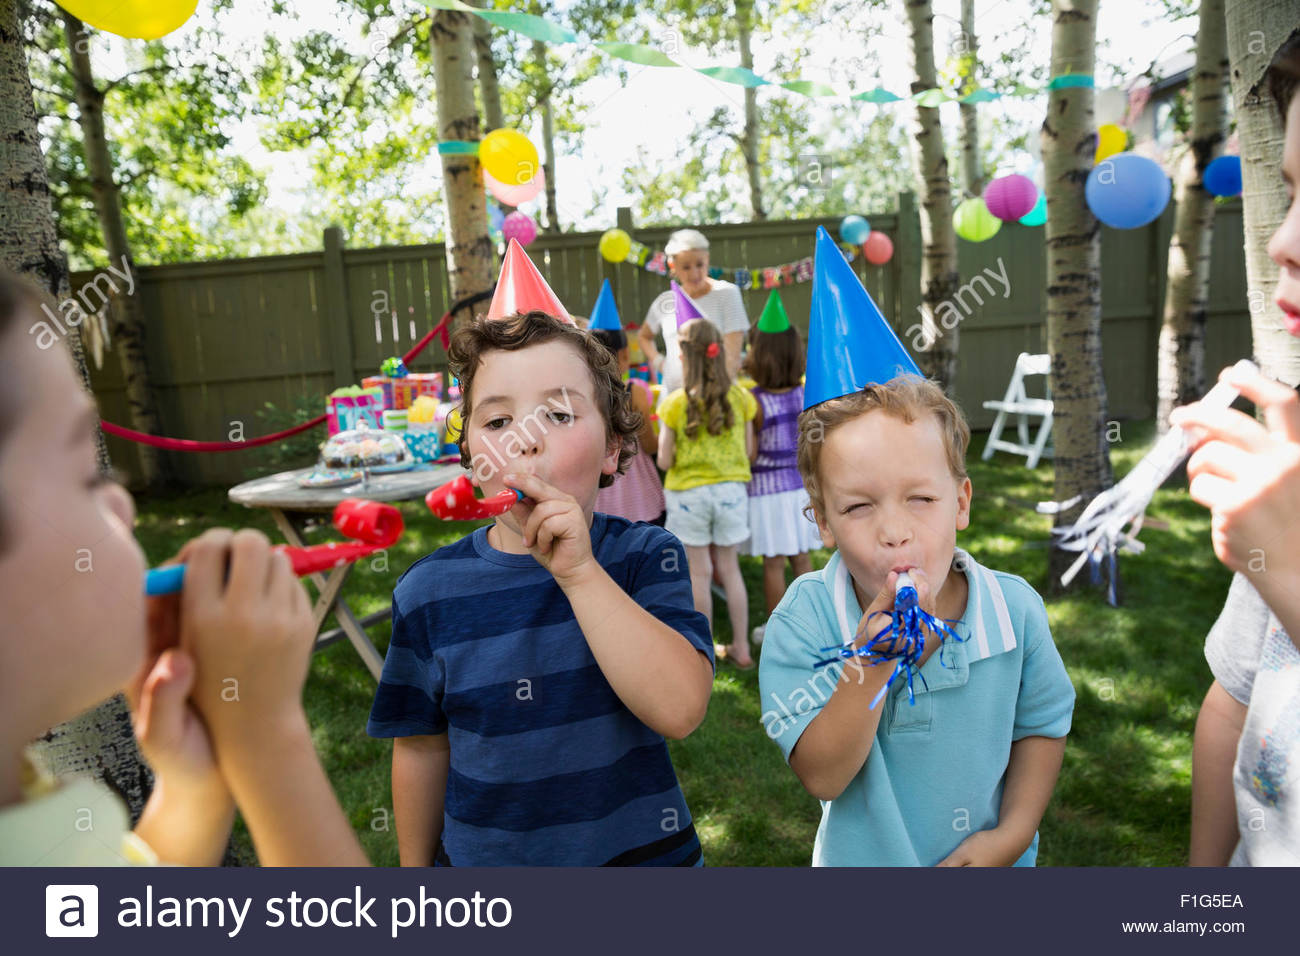 Kids in birthday party hats blowing party favors Stock Photo